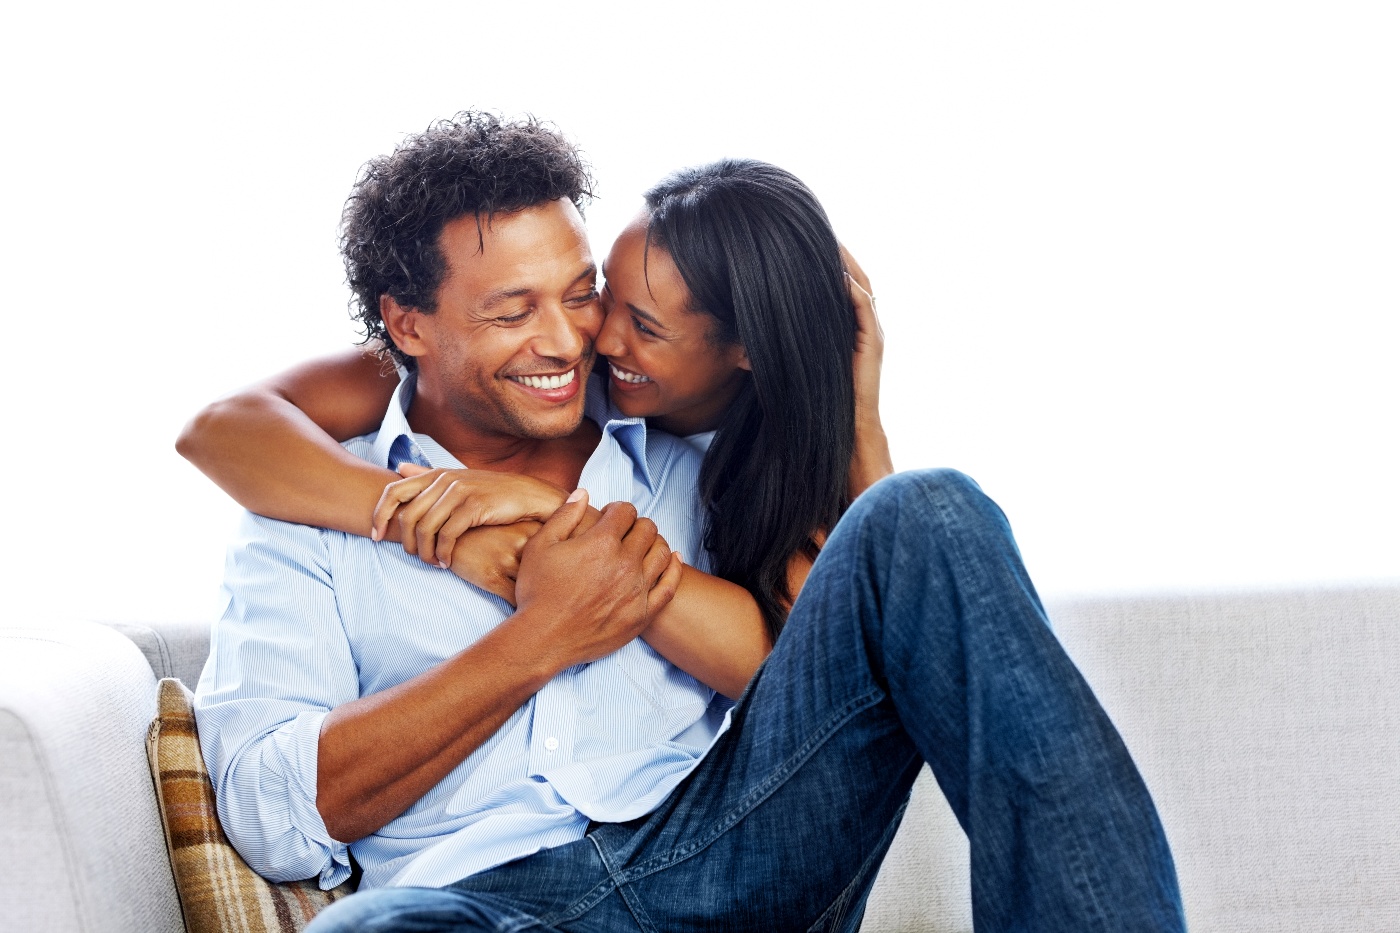 Healthy Relationships: 6 Tips to Create Harmony at Home